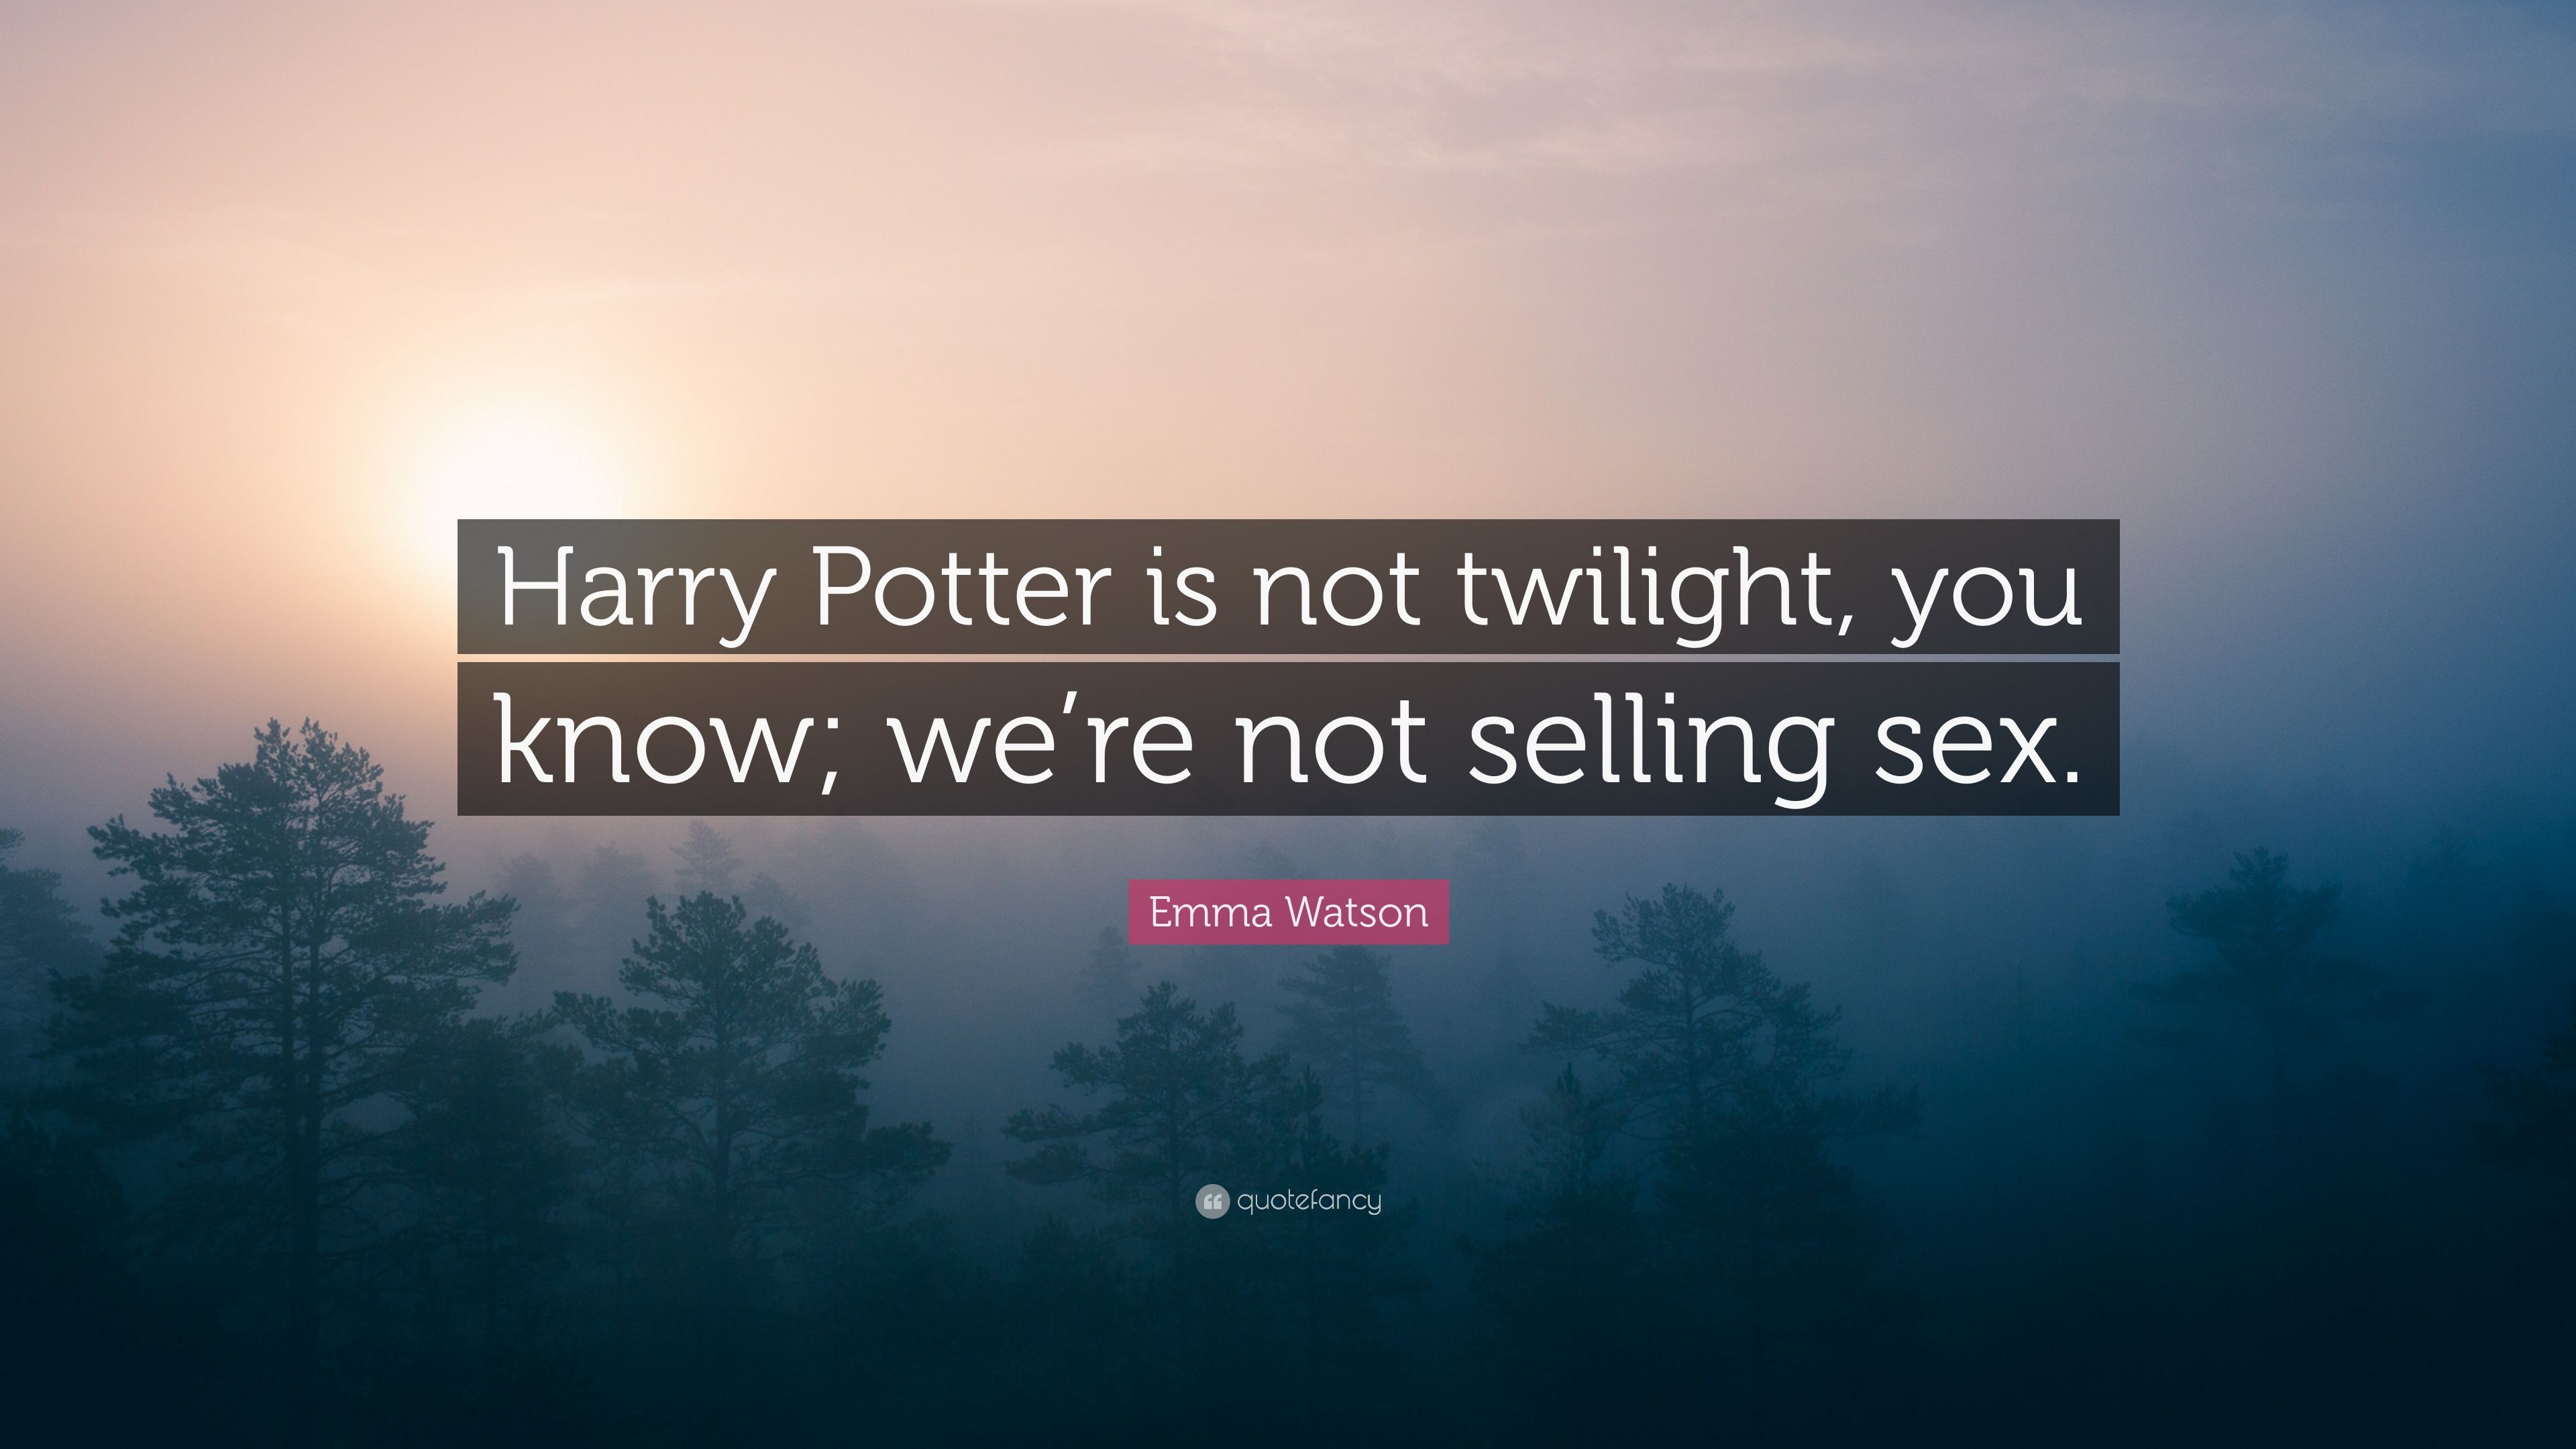 Emma Watson Quote: “Harry Potter is not twilight, you know; we're not selling sex.”